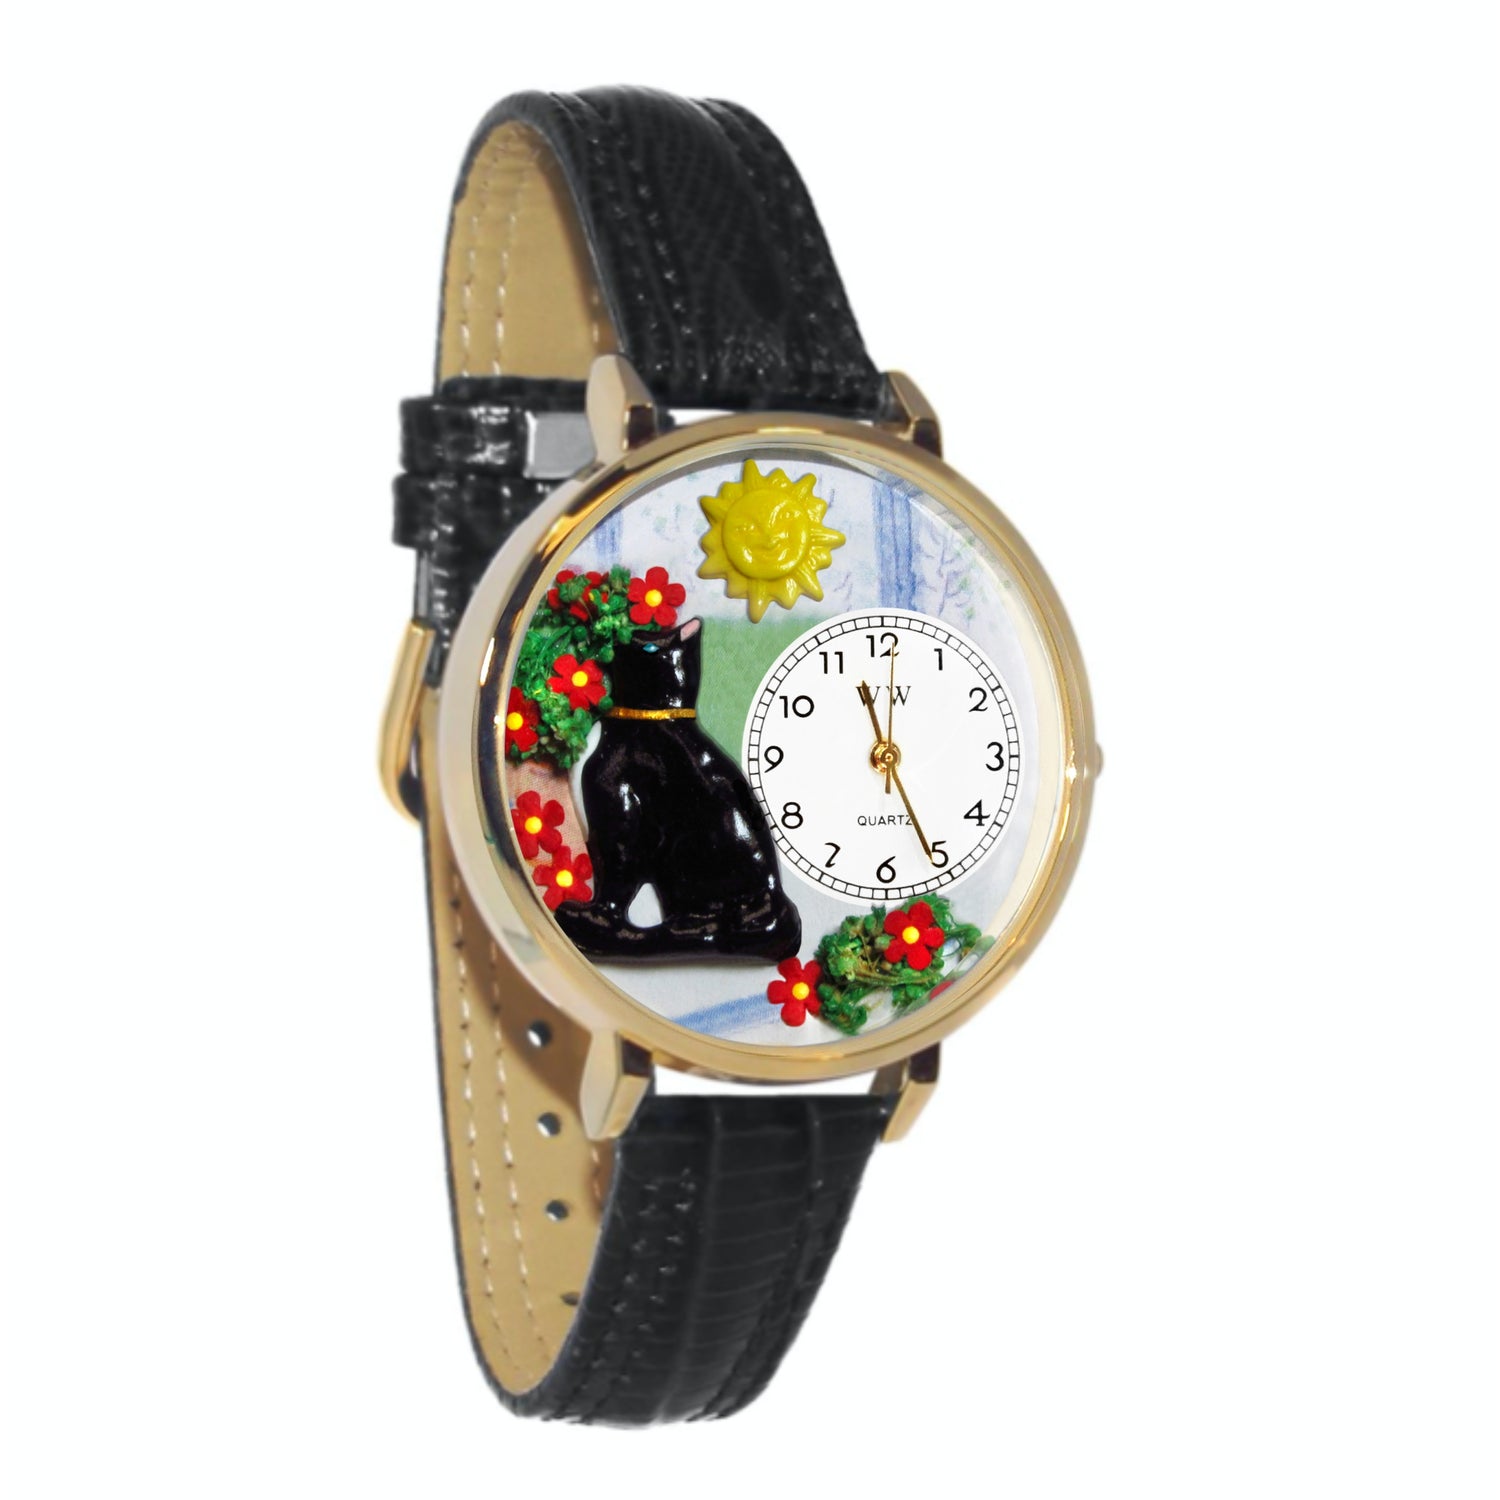 Whimsical Gifts | Basking Cat 3D Watch Large Style | Handmade in USA | Animal Lover | Cat Lover | Novelty Unique Fun Miniatures Gift | Gold Finish Black Leather Watch Band